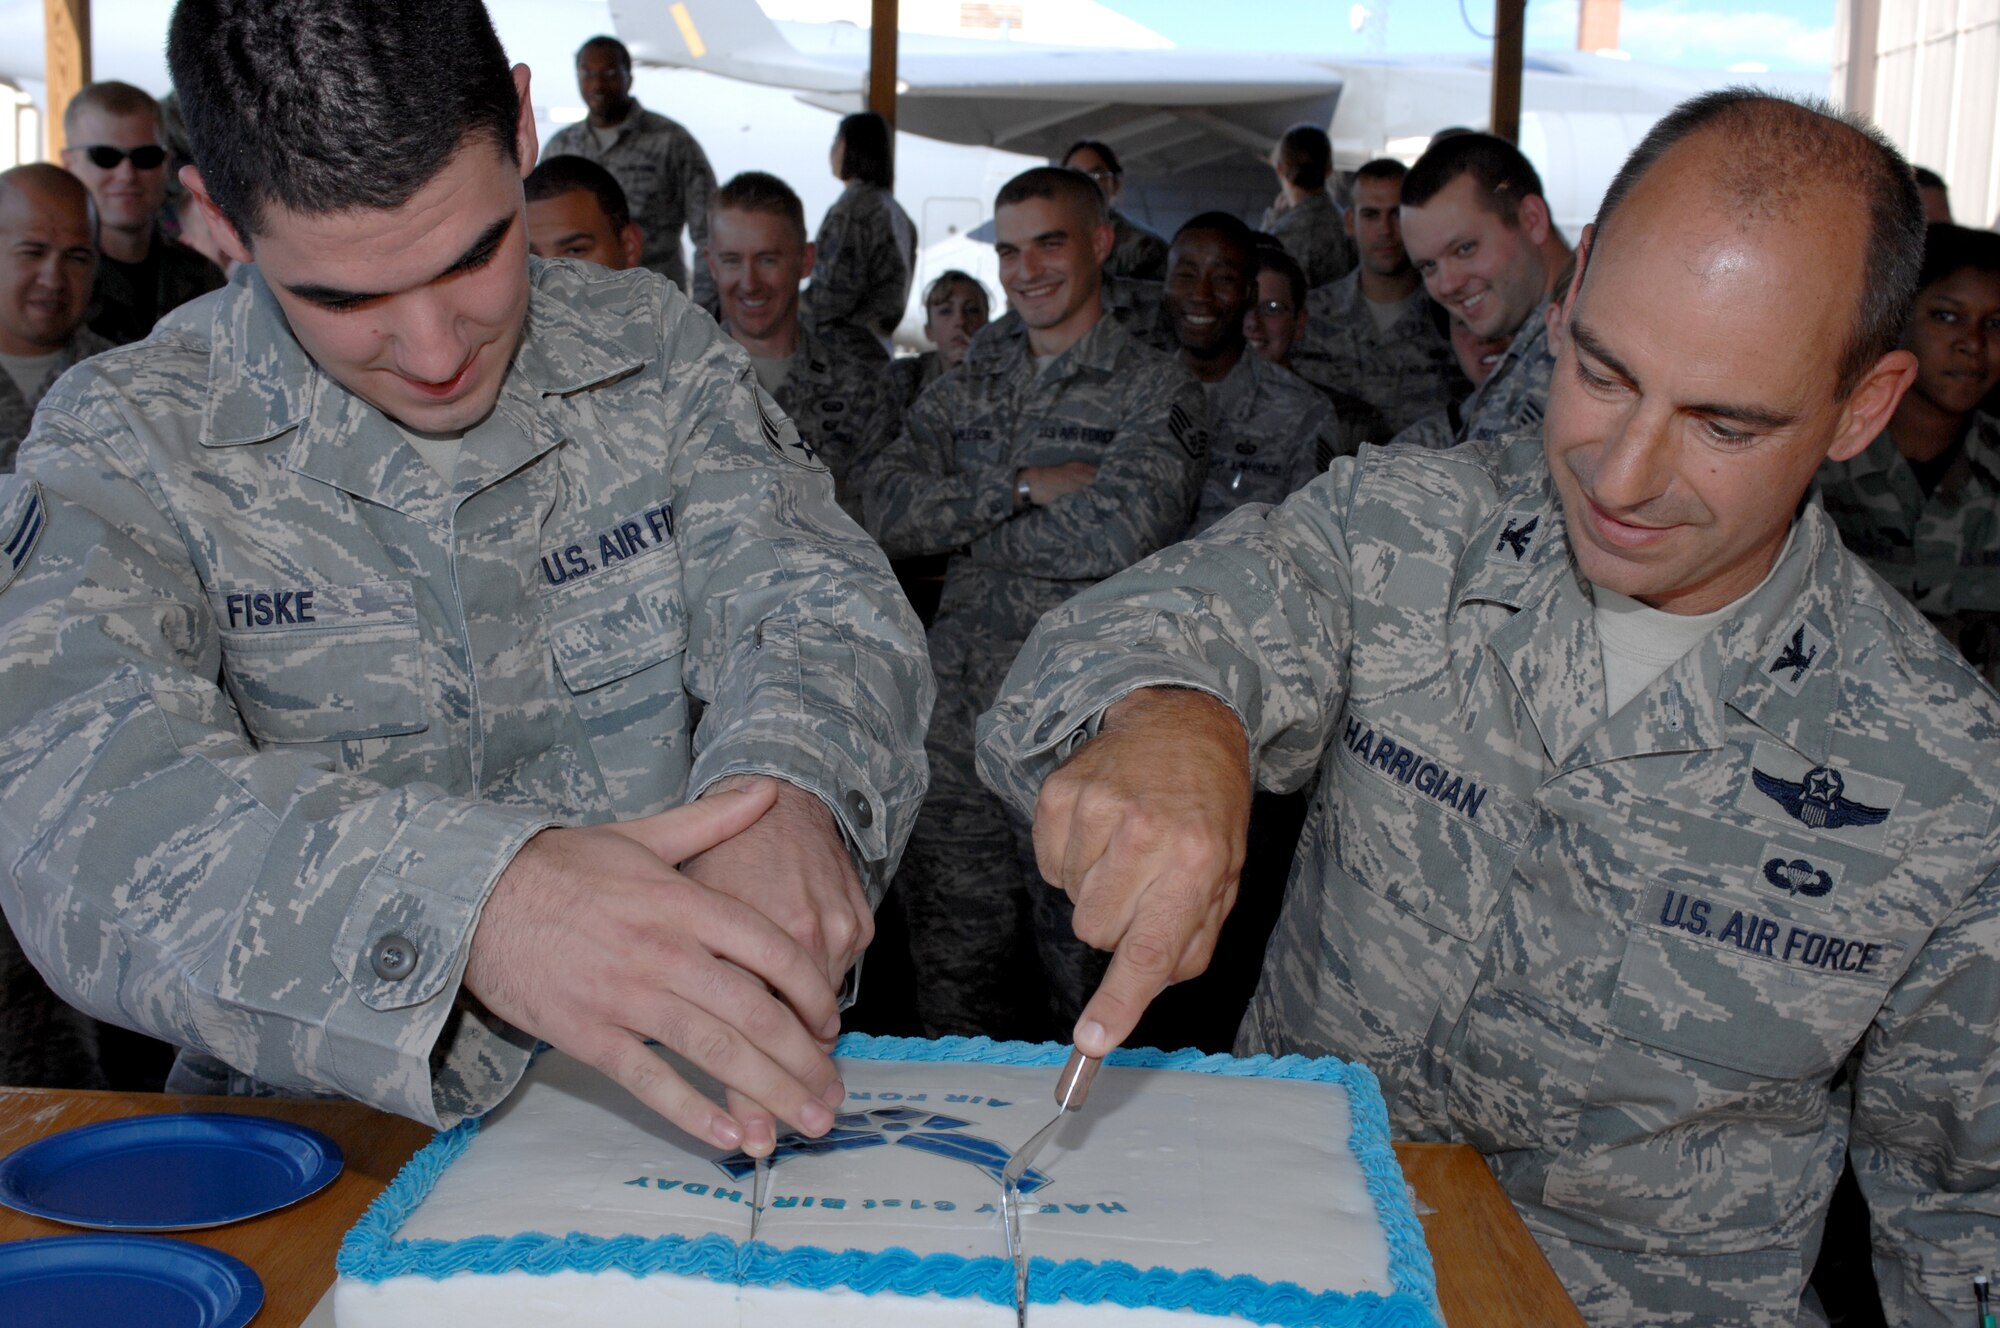 Airman 1st Class Joshua Fiske, 49th Operations Support Squadron, and Col. Jeff Harrigian, 49th Fighter Wing commander, execute the honors of cutting the cake at the Air Force birthday celebration outside the 7th Fighter Squadron at Holloman Air Force Base, N.M., September 16. Airman Fiske was chosen as he is the youngest member of the 49 OSS. The cake was in honor of the Air Force?s 61st Birthday. (U.S. Air Force photo/Airman Sondra M. Escutia)